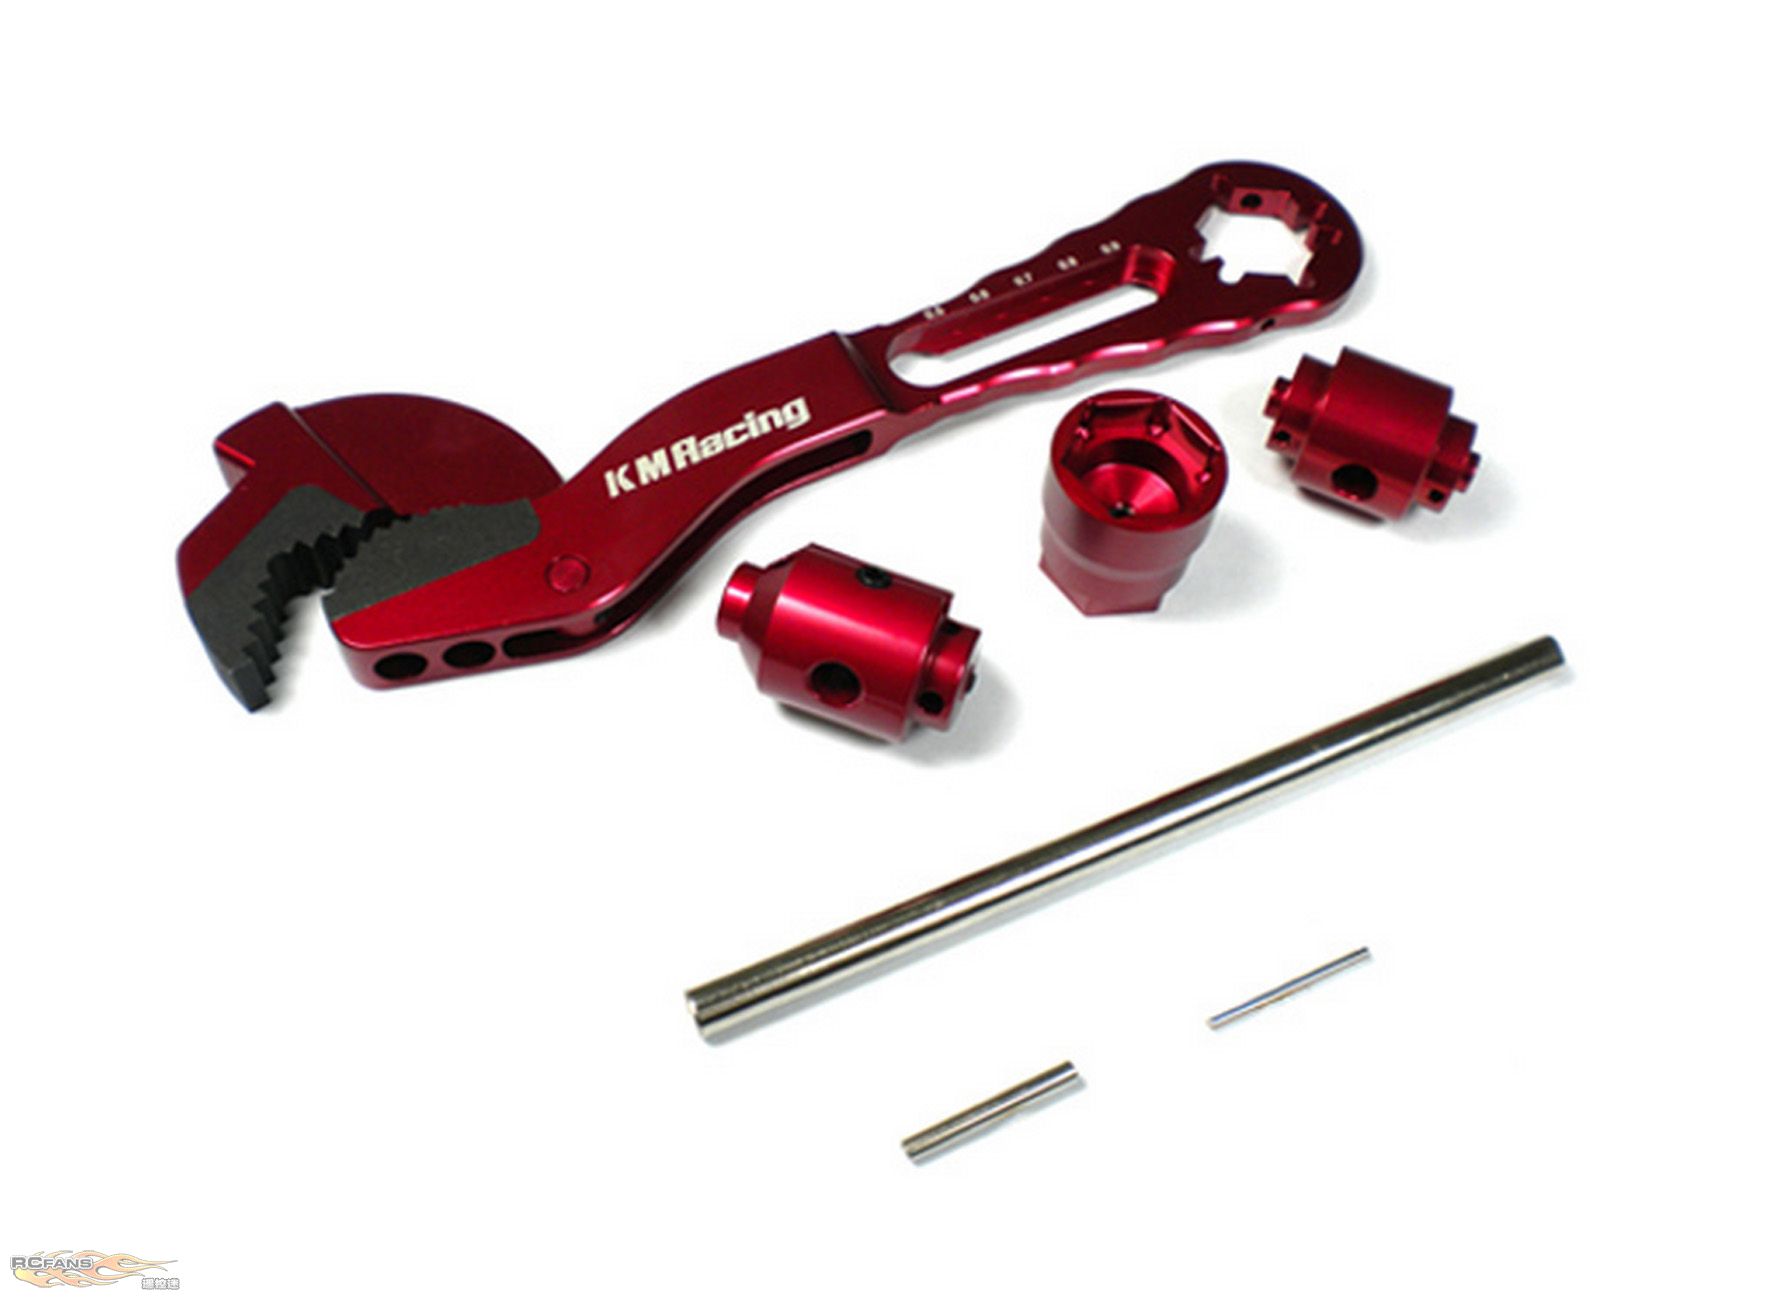 Red GM KMR-A036 Universal Clutch Gear Wrench.jpg